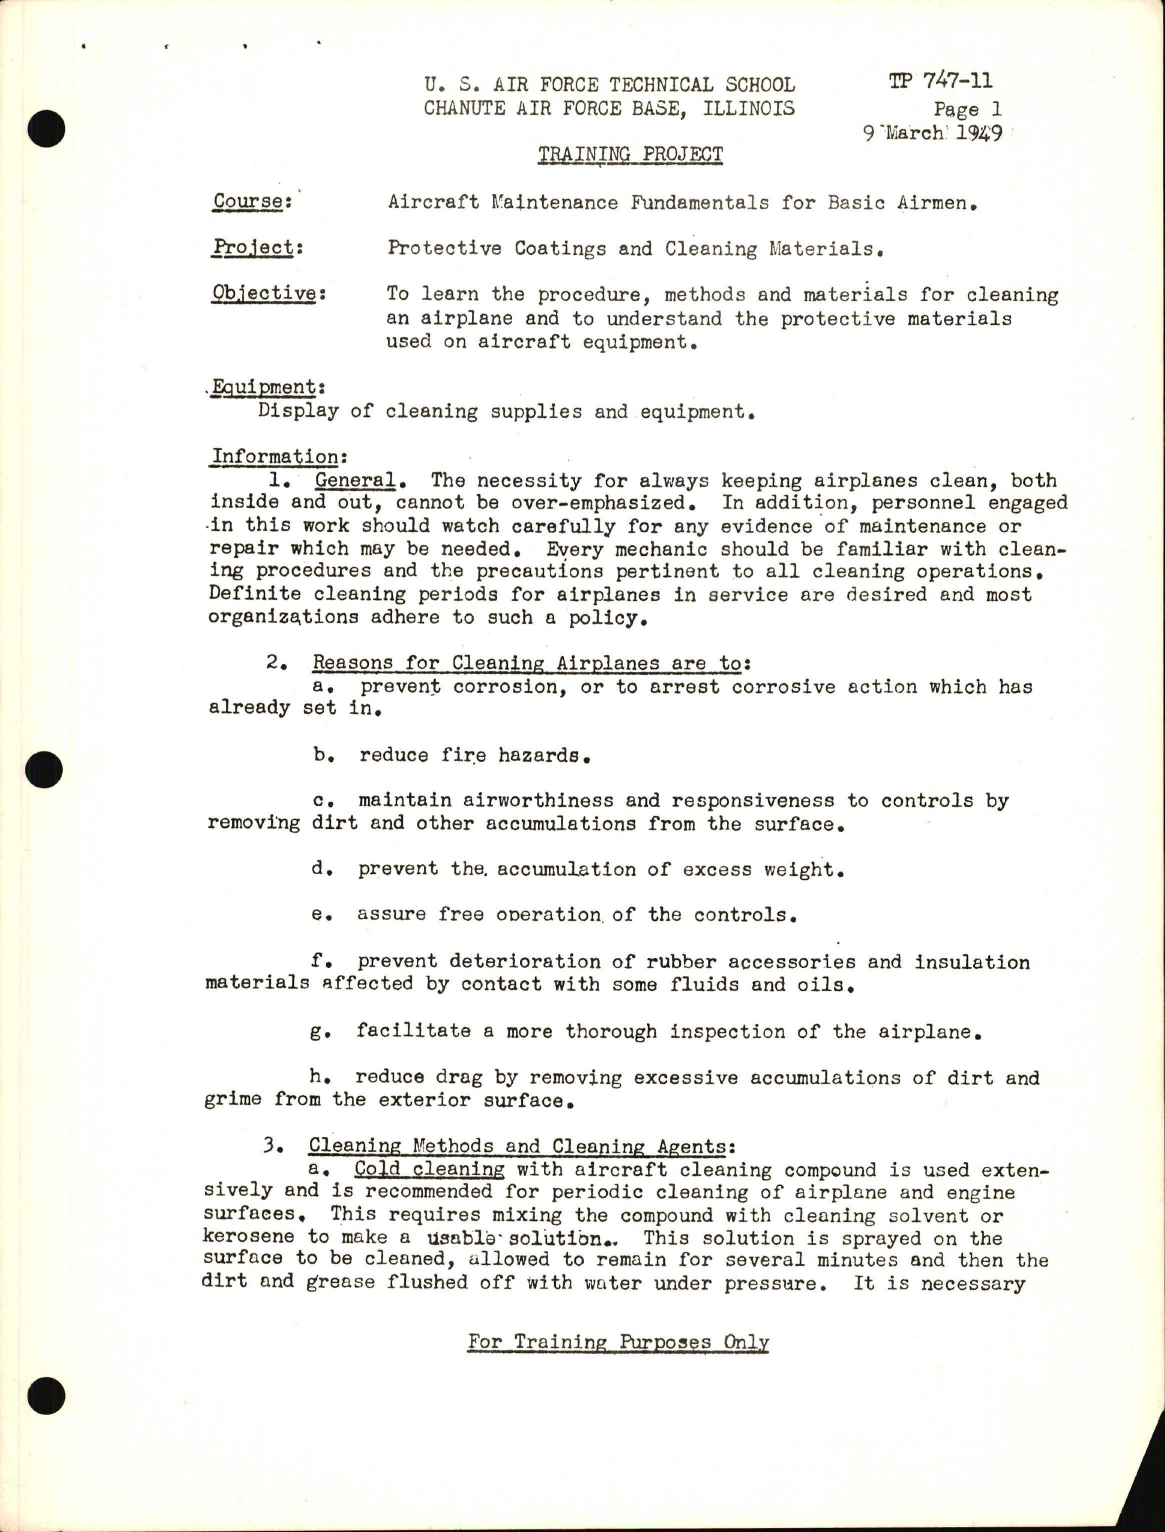 Sample page 1 from AirCorps Library document: Training Project, Protective Coatings and Clearing Materials